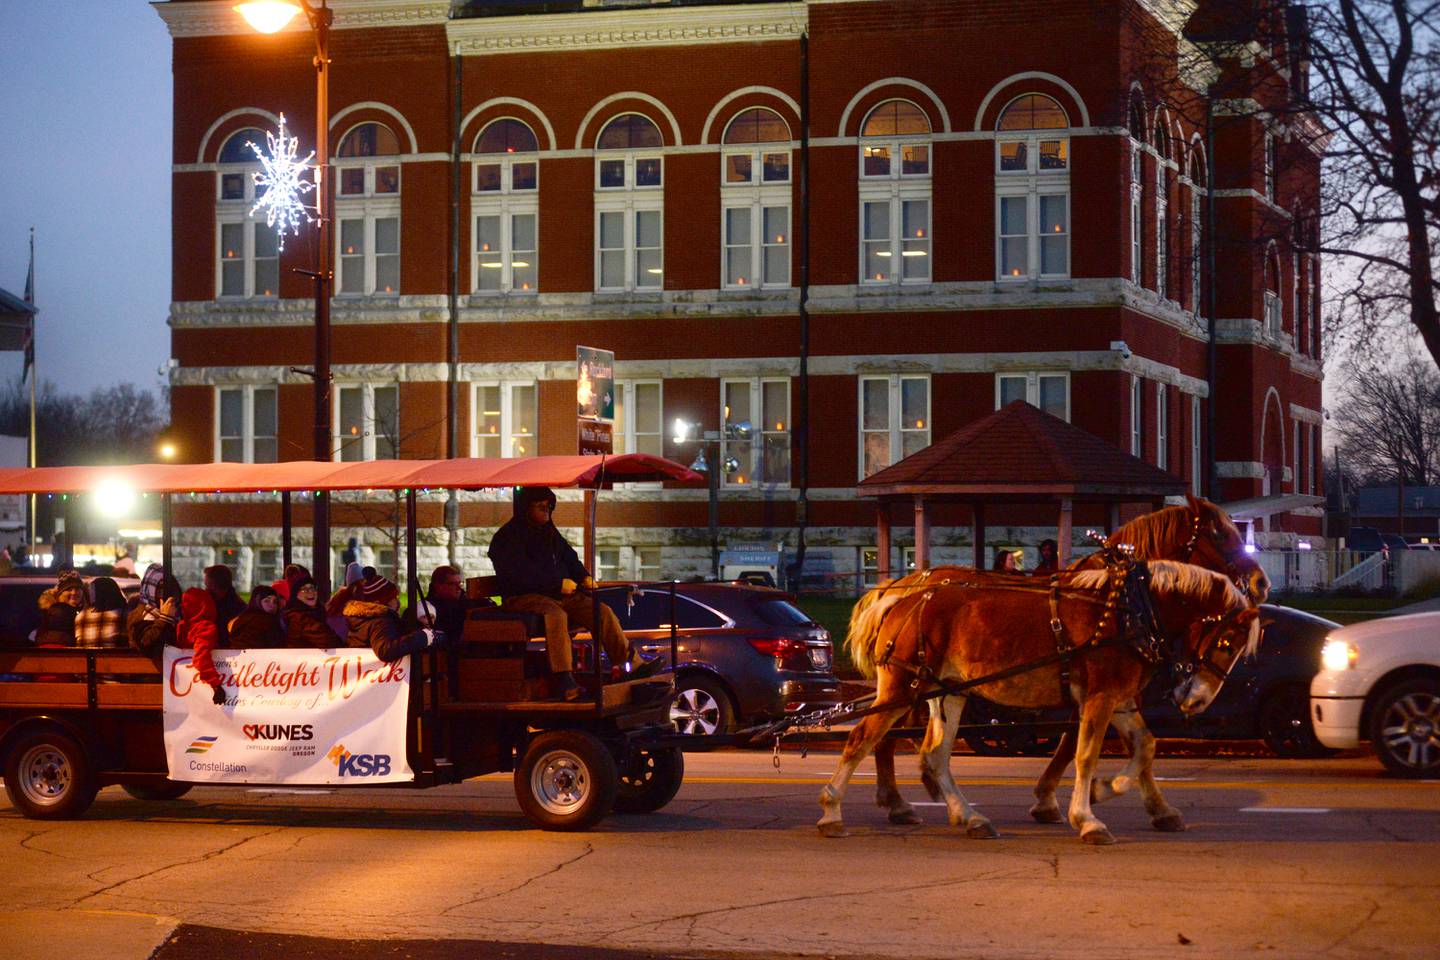 Wagon rides were just part of Oregon's Candlelight Walk on Saturday, Nov. 25. 2023. Here, one of the wagons passes by the historic Ogle County Courthouse.